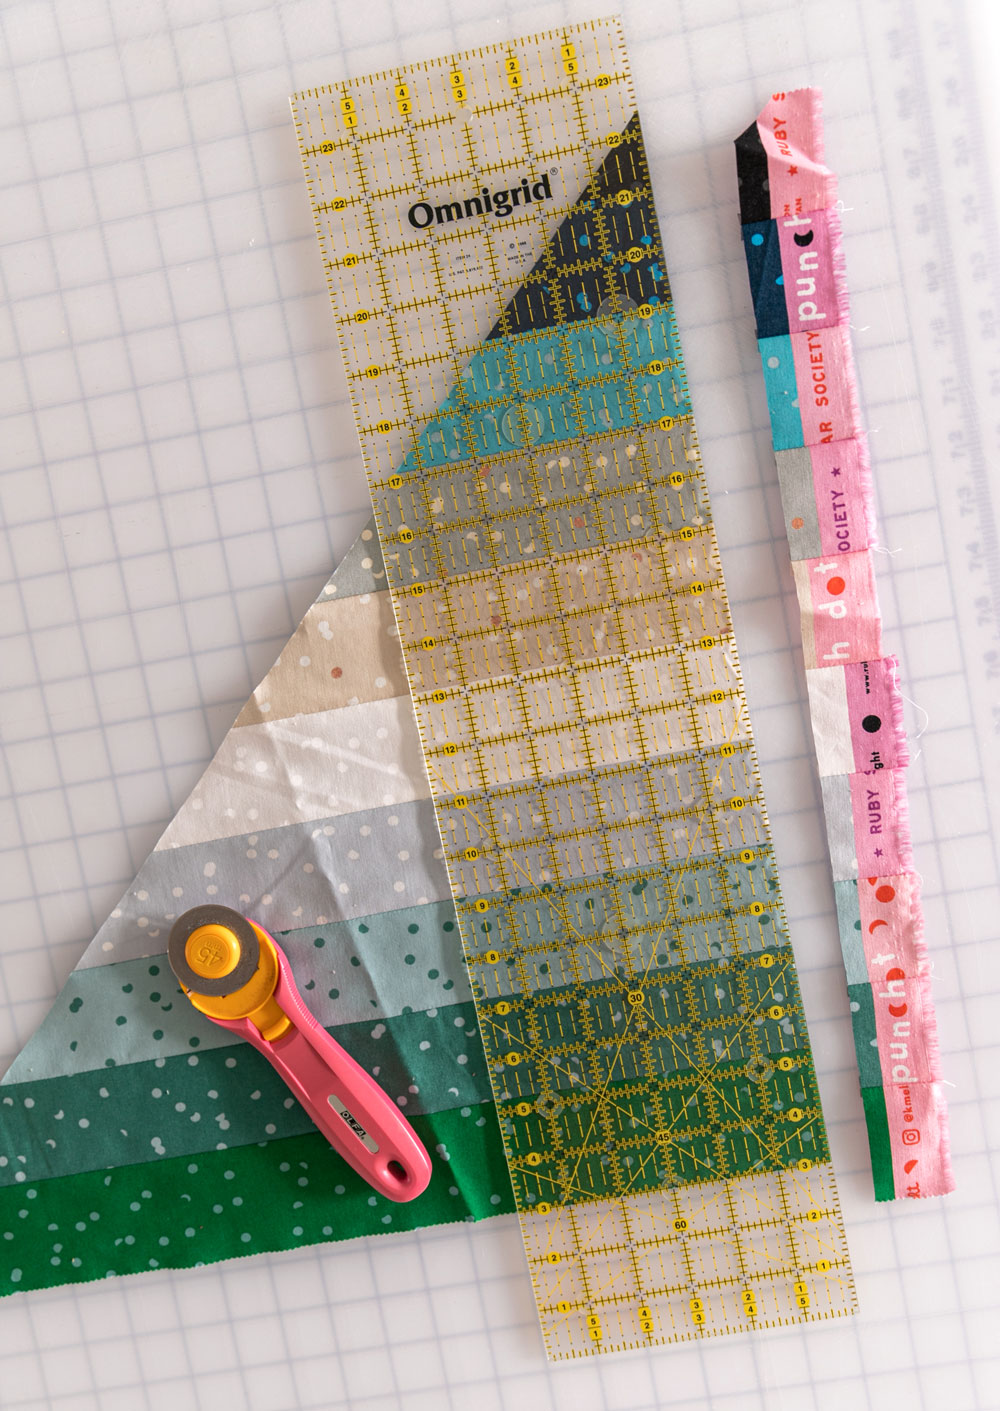 Use the trimmed scraps from the Adventureland quilt pattern to make a fun pieced binding! This is a fantastic way to maximize your fabric. suzyquilts.com #quilttutorial